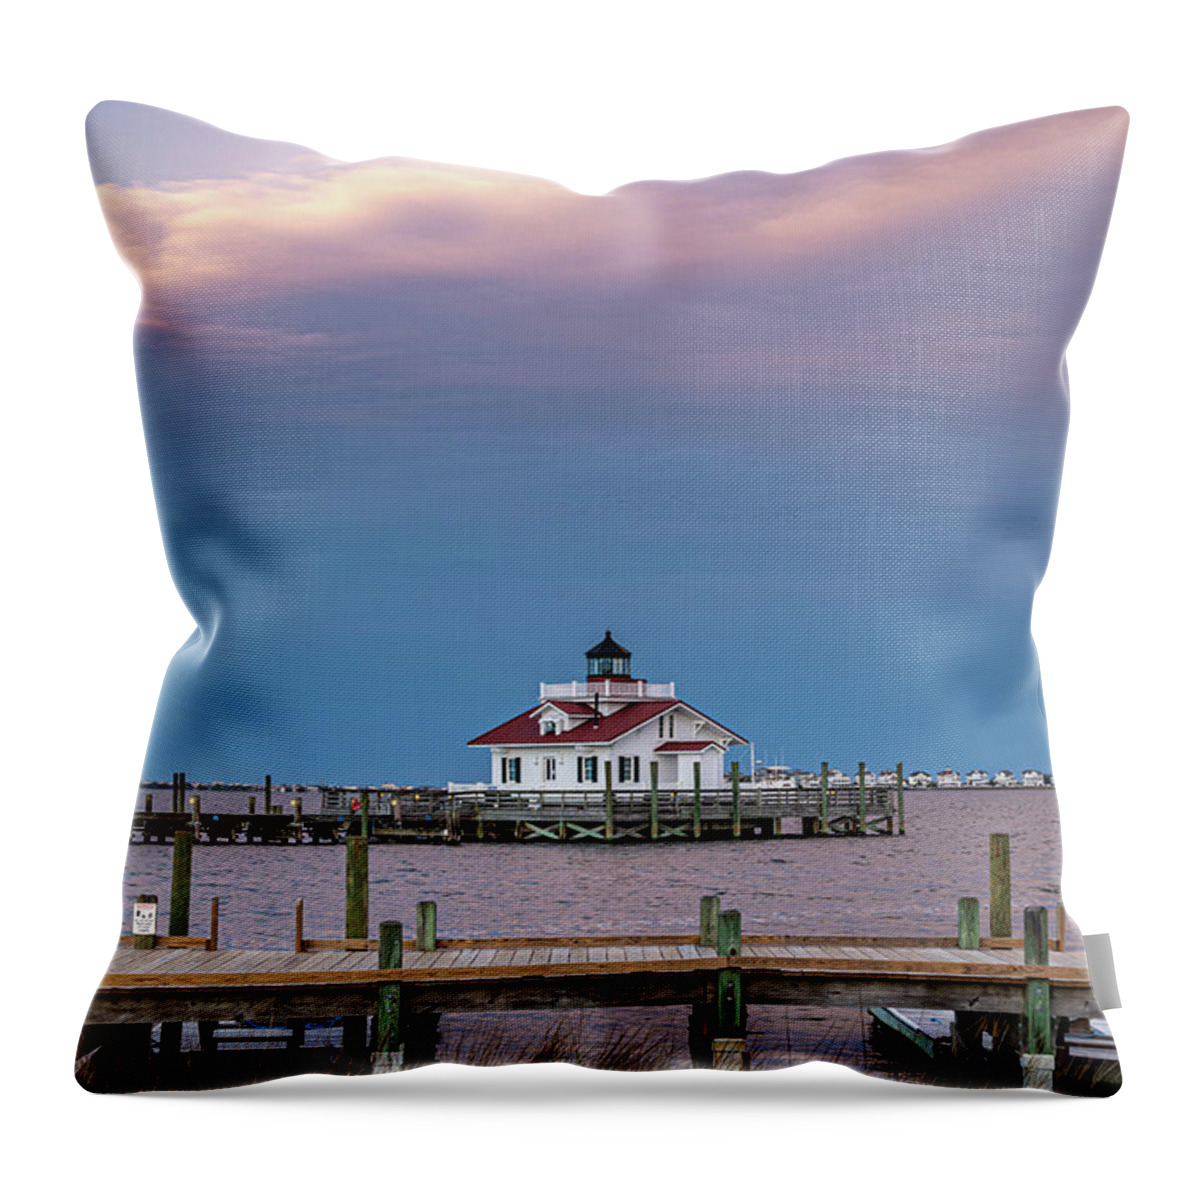 North Carolina Throw Pillow featuring the photograph Roanoke Marshes Lighthouse after Sunset by Claudia Domenig